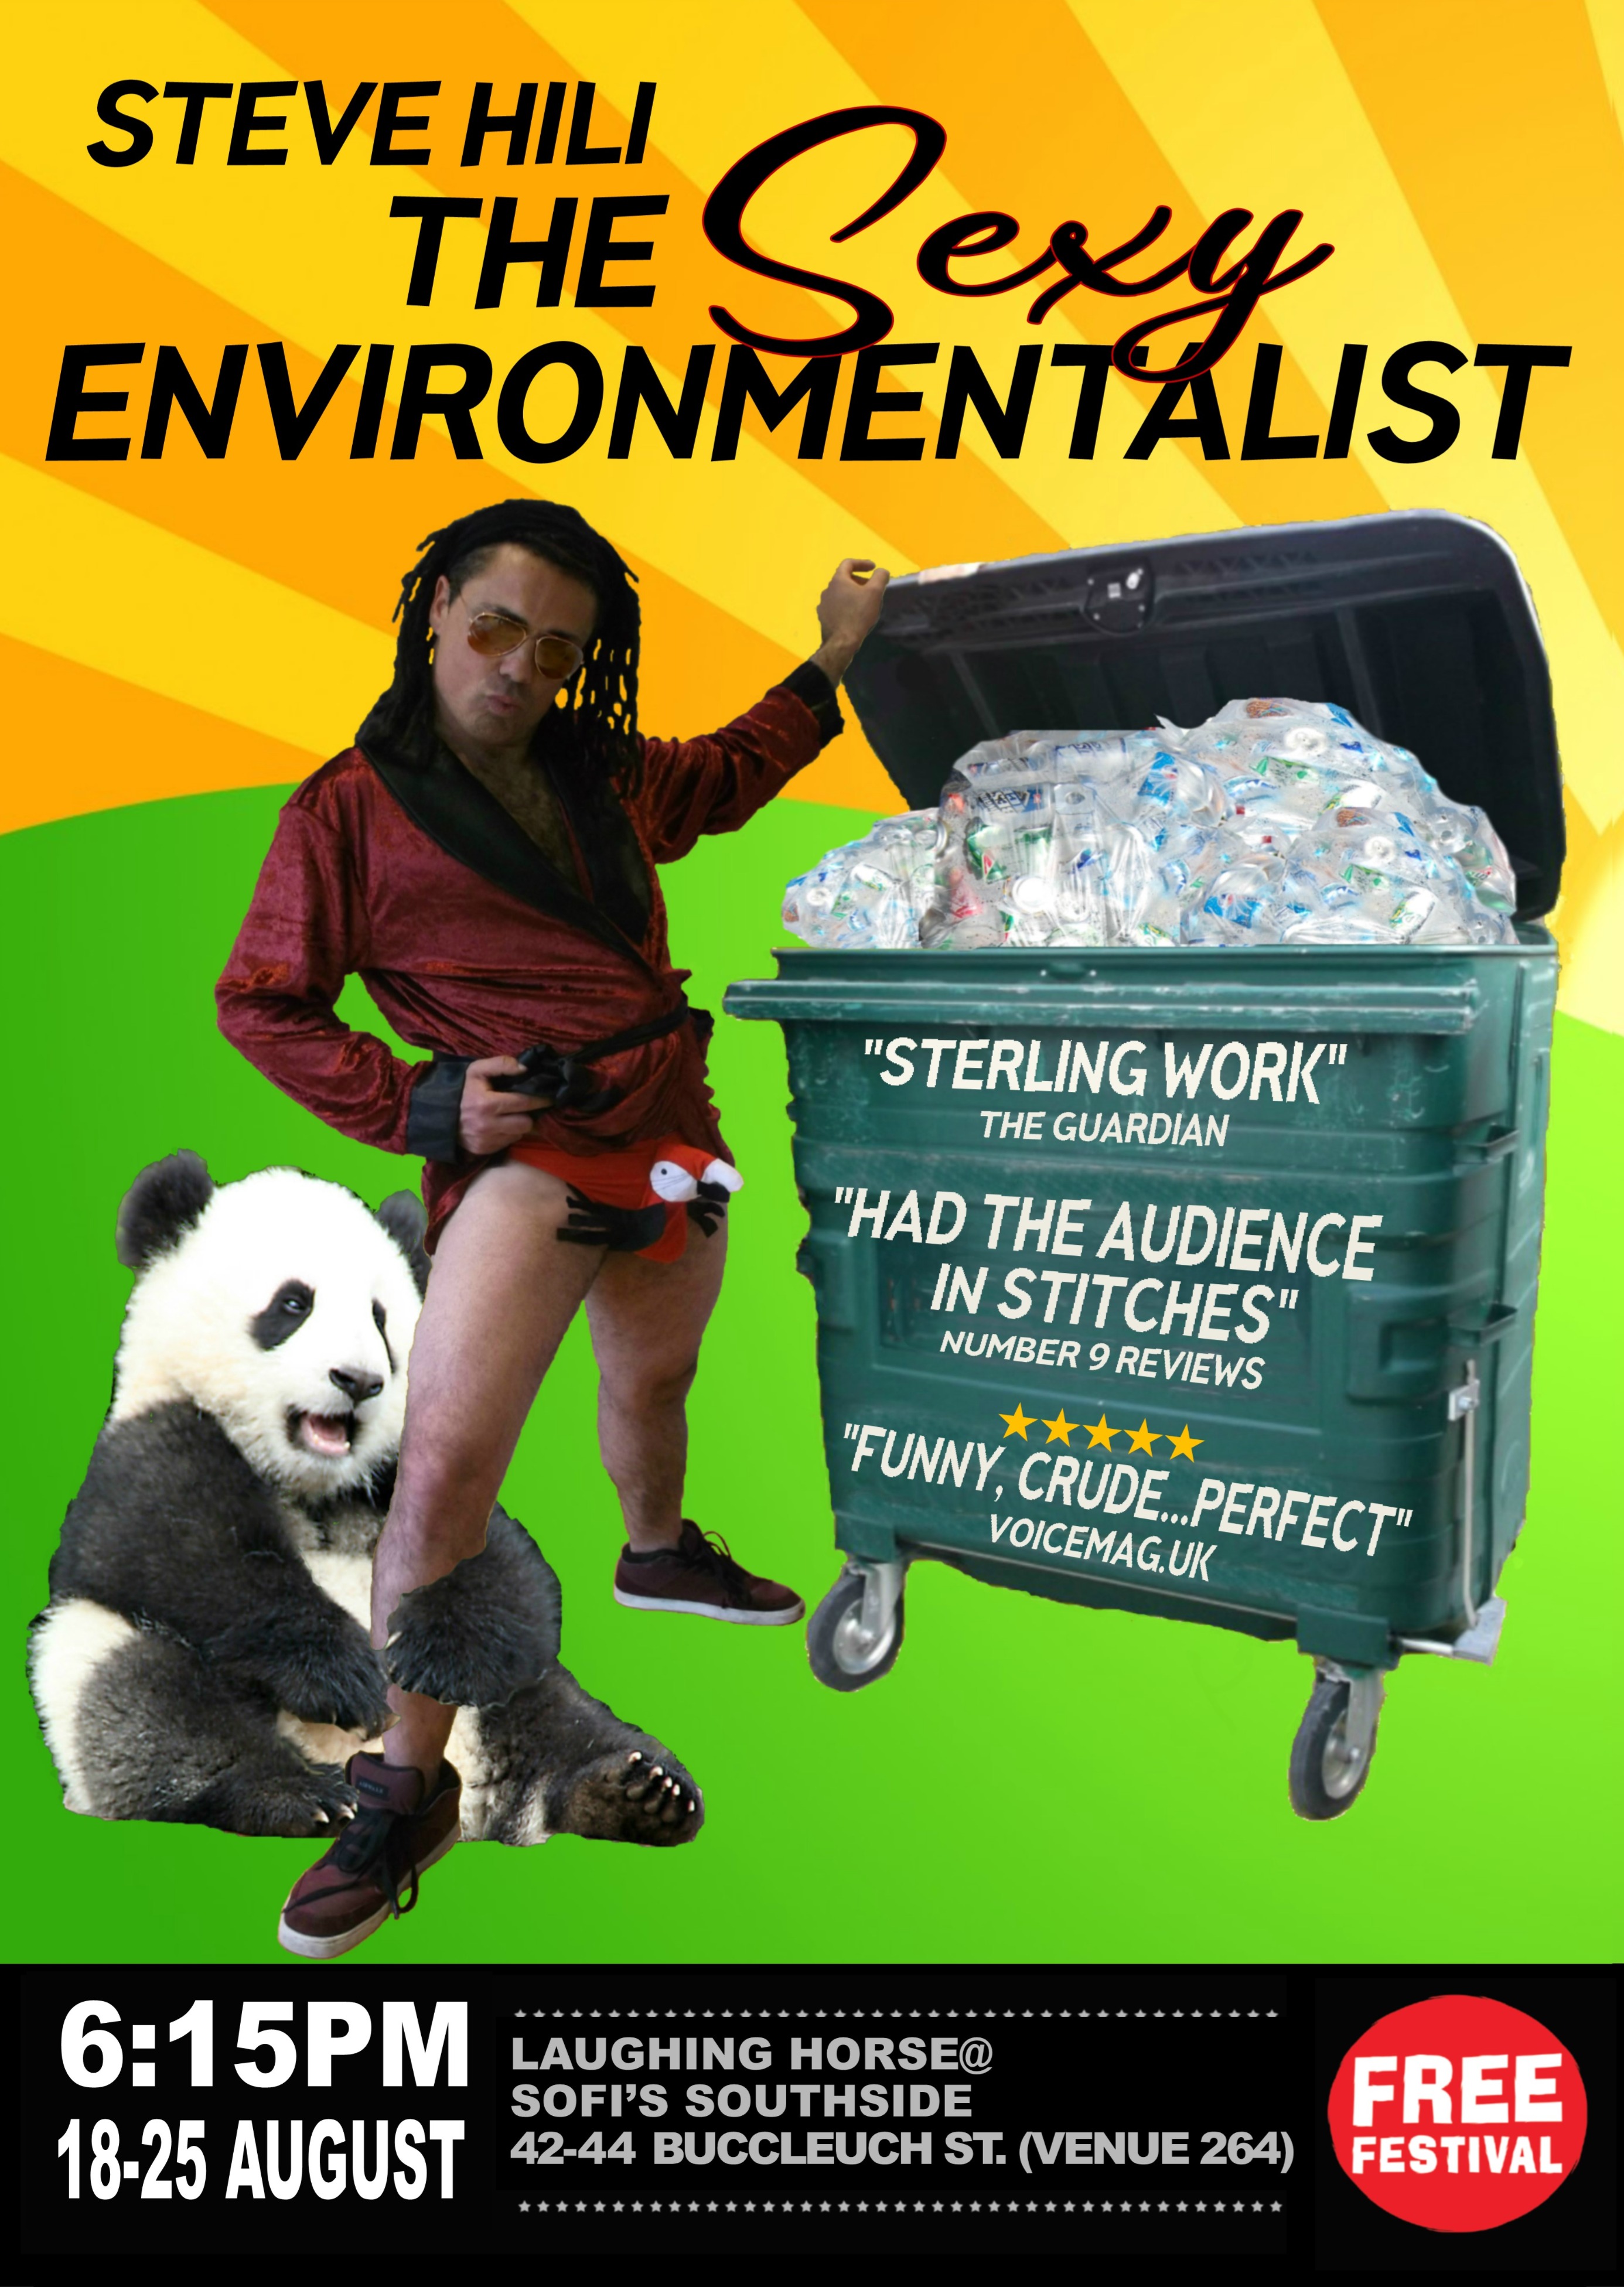 The poster for Steve Hili: The Sexy Environmentalist